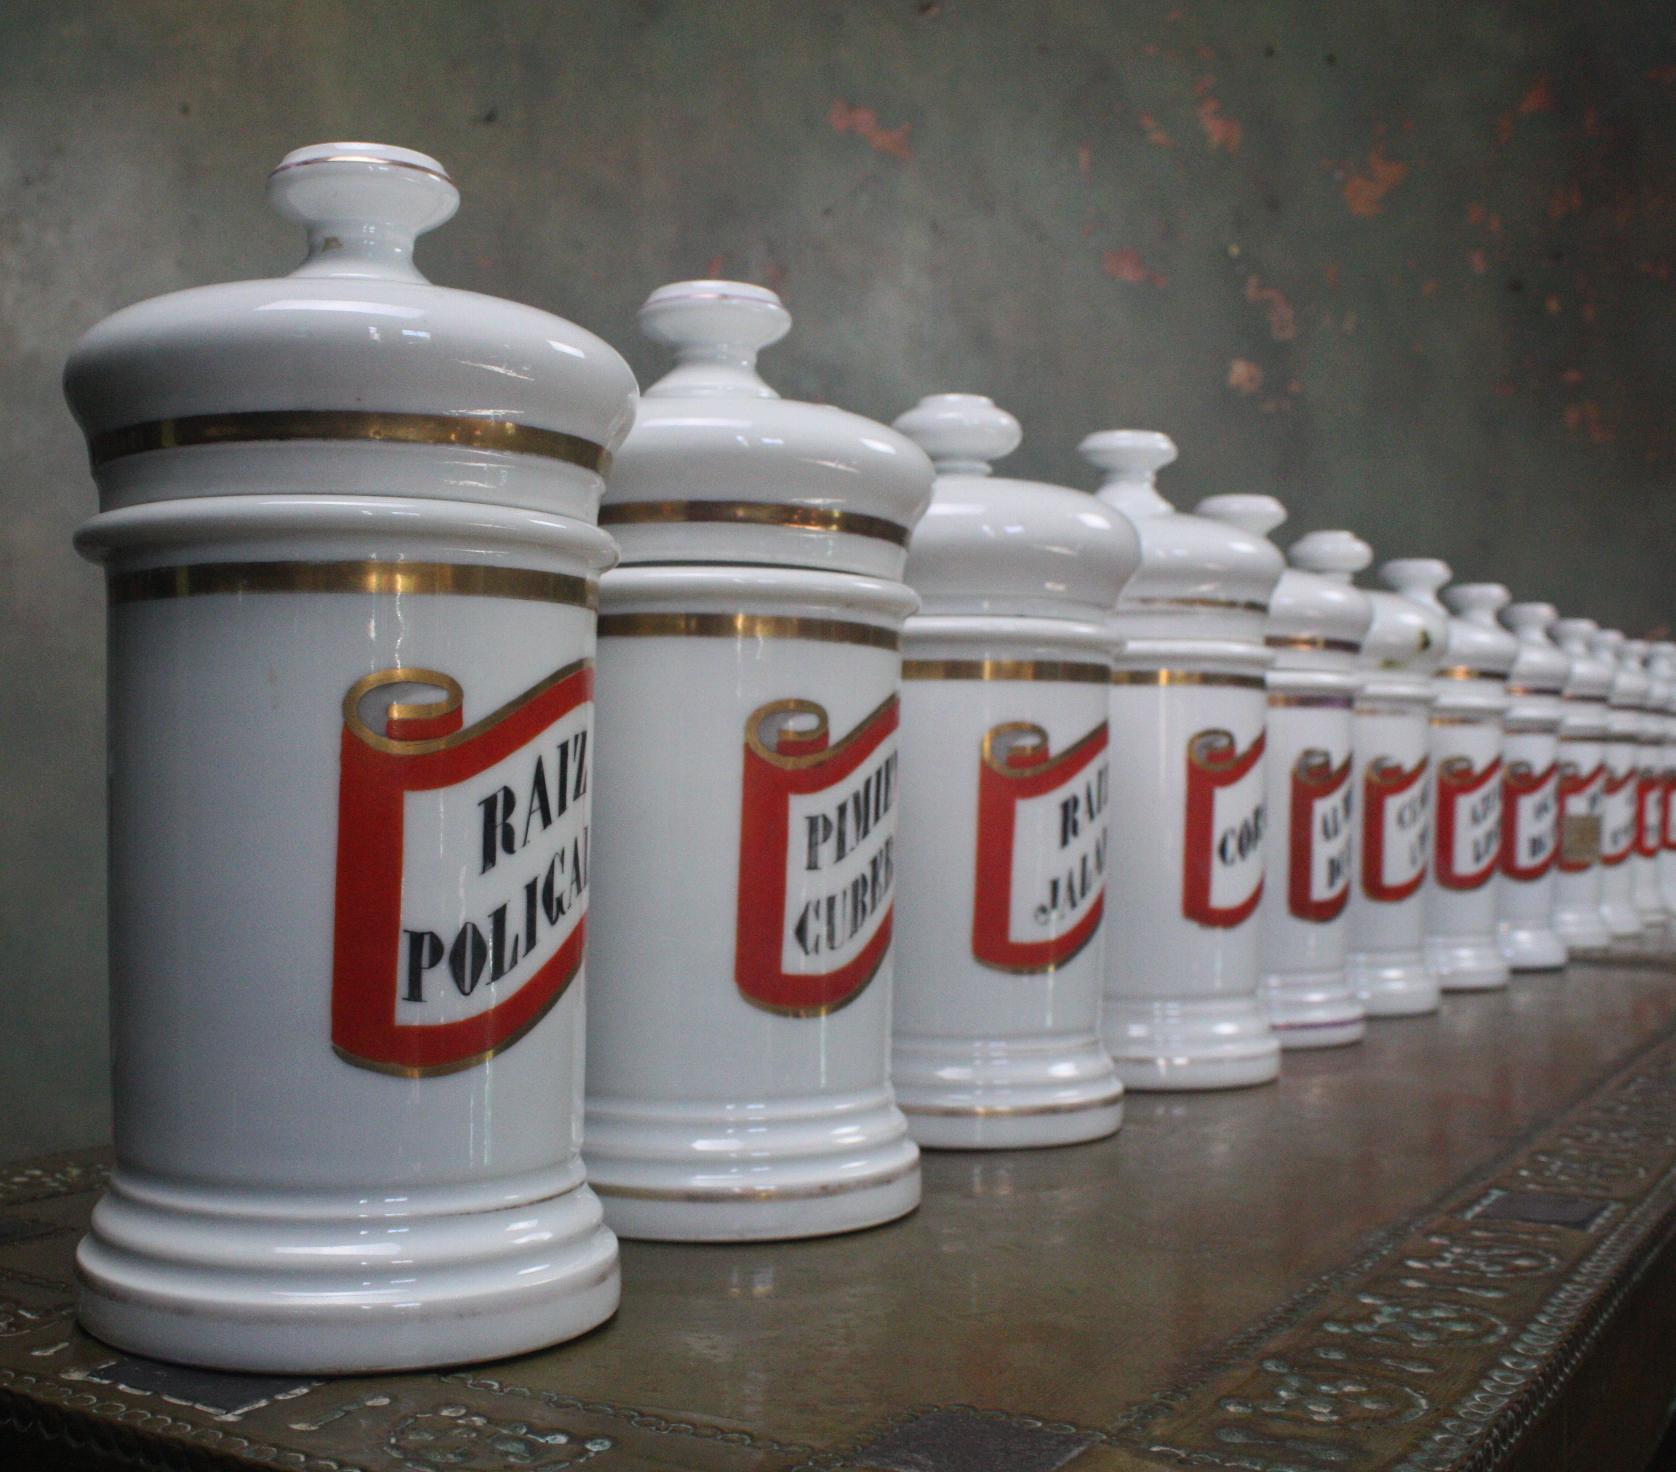 Rare collection of 22 ivory white stoneware dispensing jars. These where removed from a chemist in Barcelona, a number of them did have there original contents (now removed). These jars where used to hold dry goods, circa 1880s in age. 

The jars